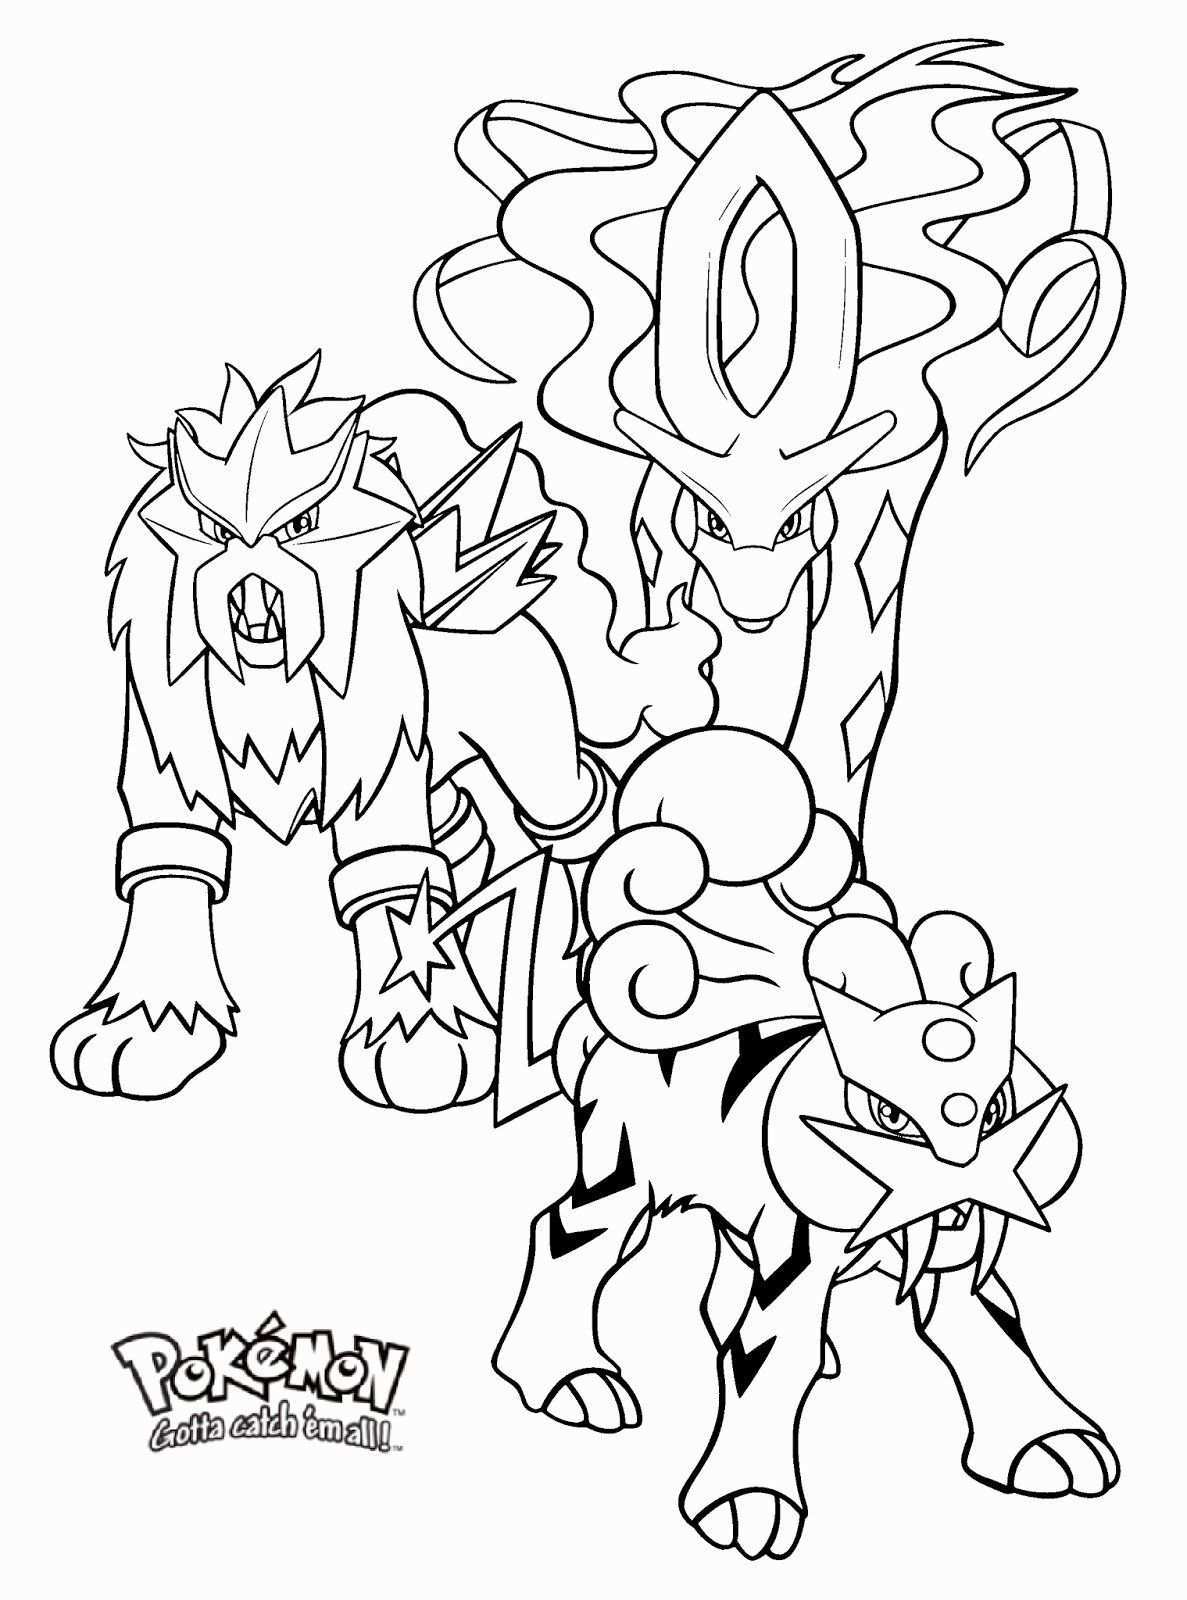 Legendary Pokemon Coloring Page Awesome Free Legendary Pokemon Coloring Pages For Kid